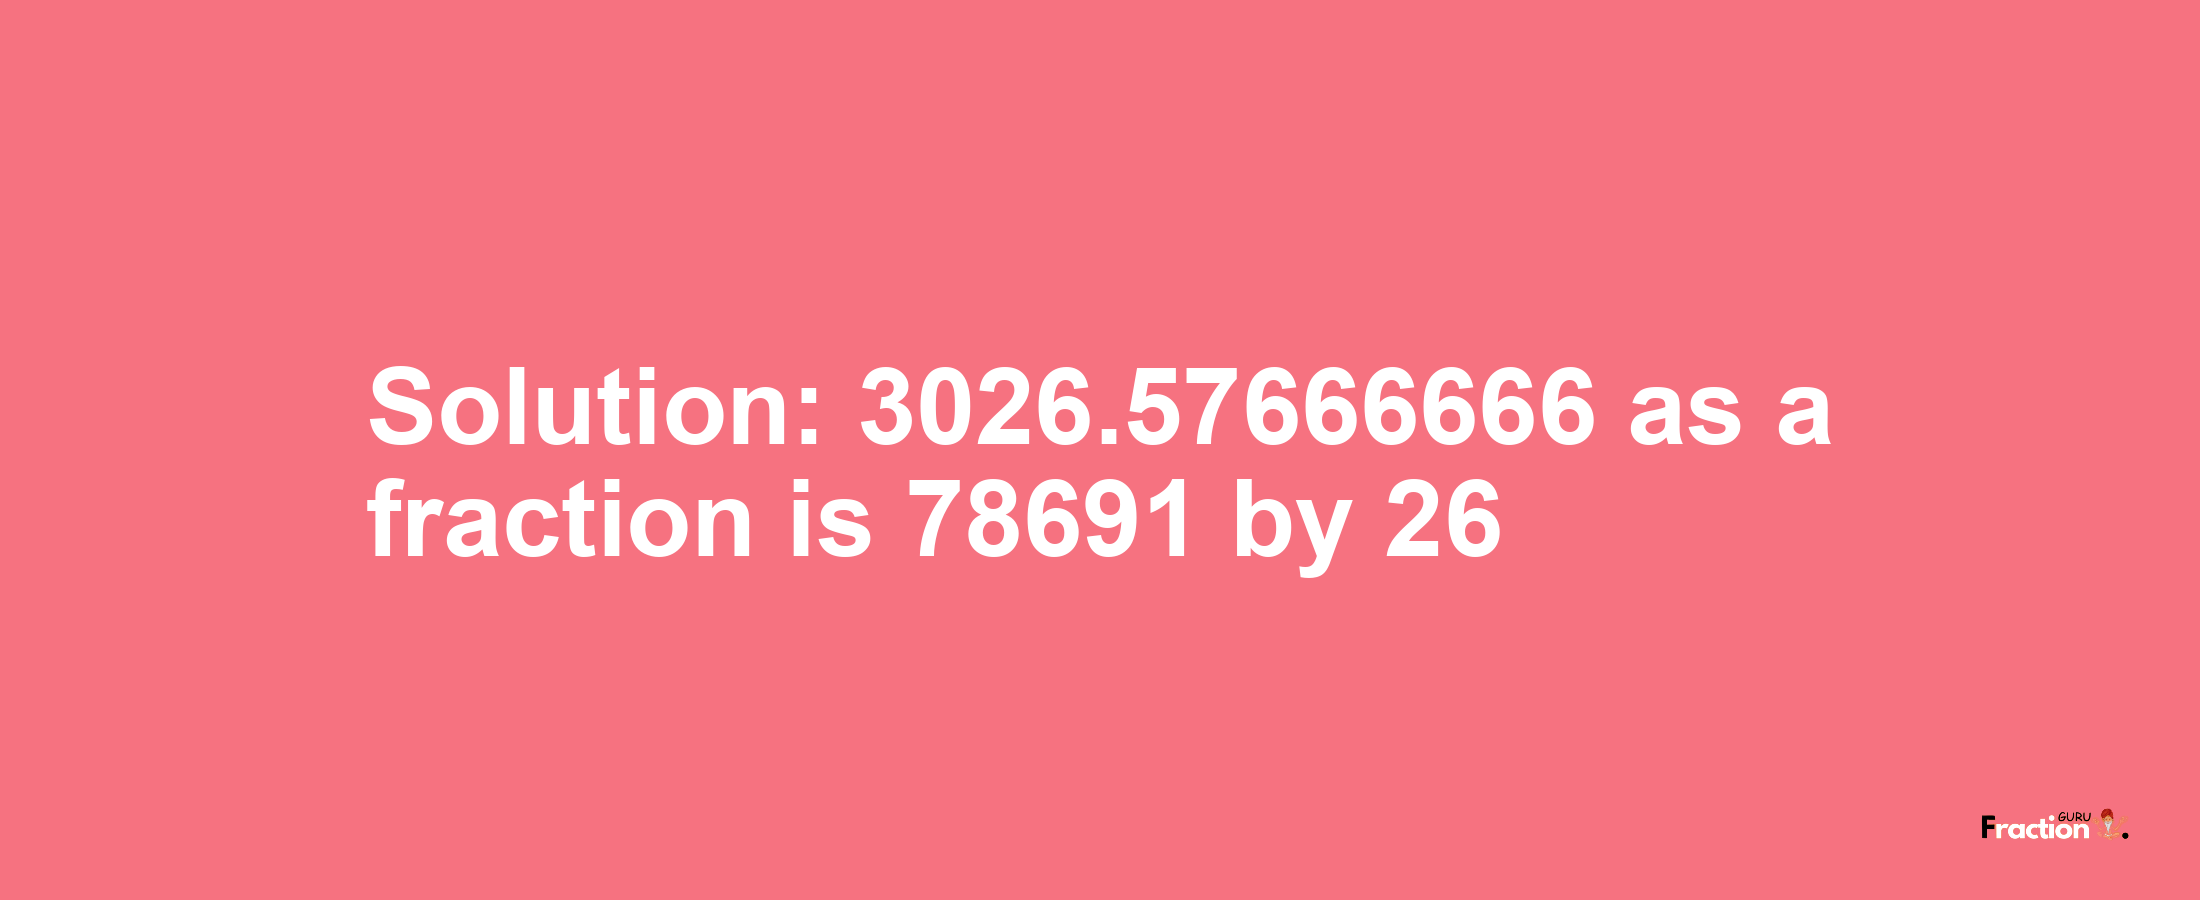 Solution:3026.57666666 as a fraction is 78691/26